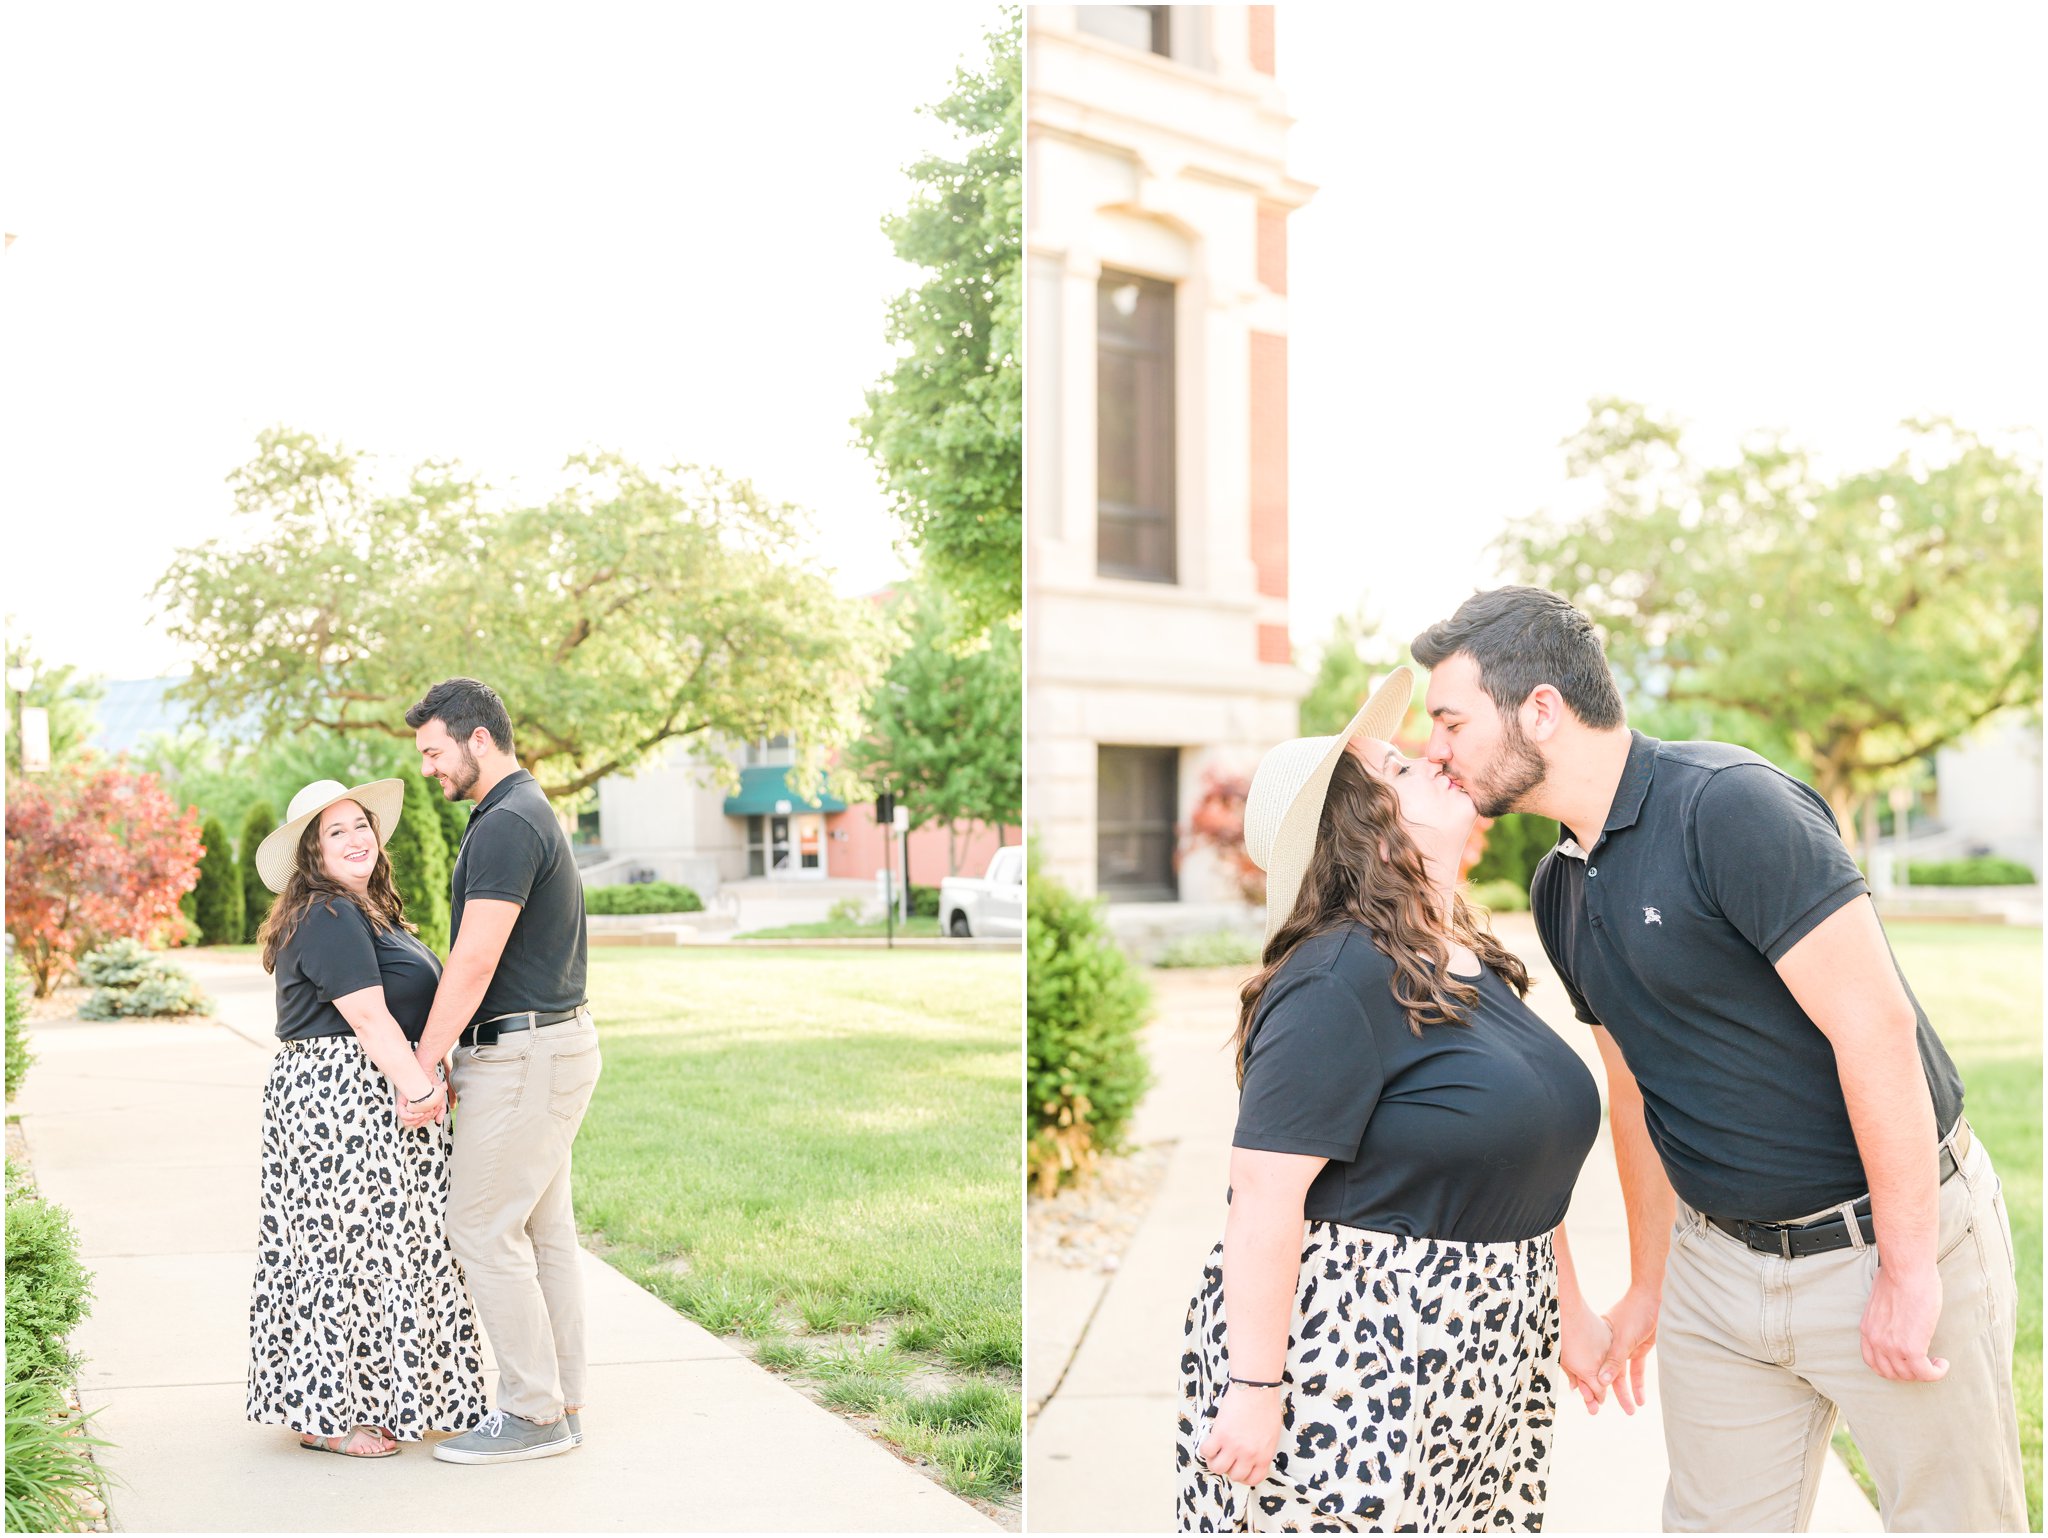 Dip kiss Downtown Franklin, Indiana engagement session